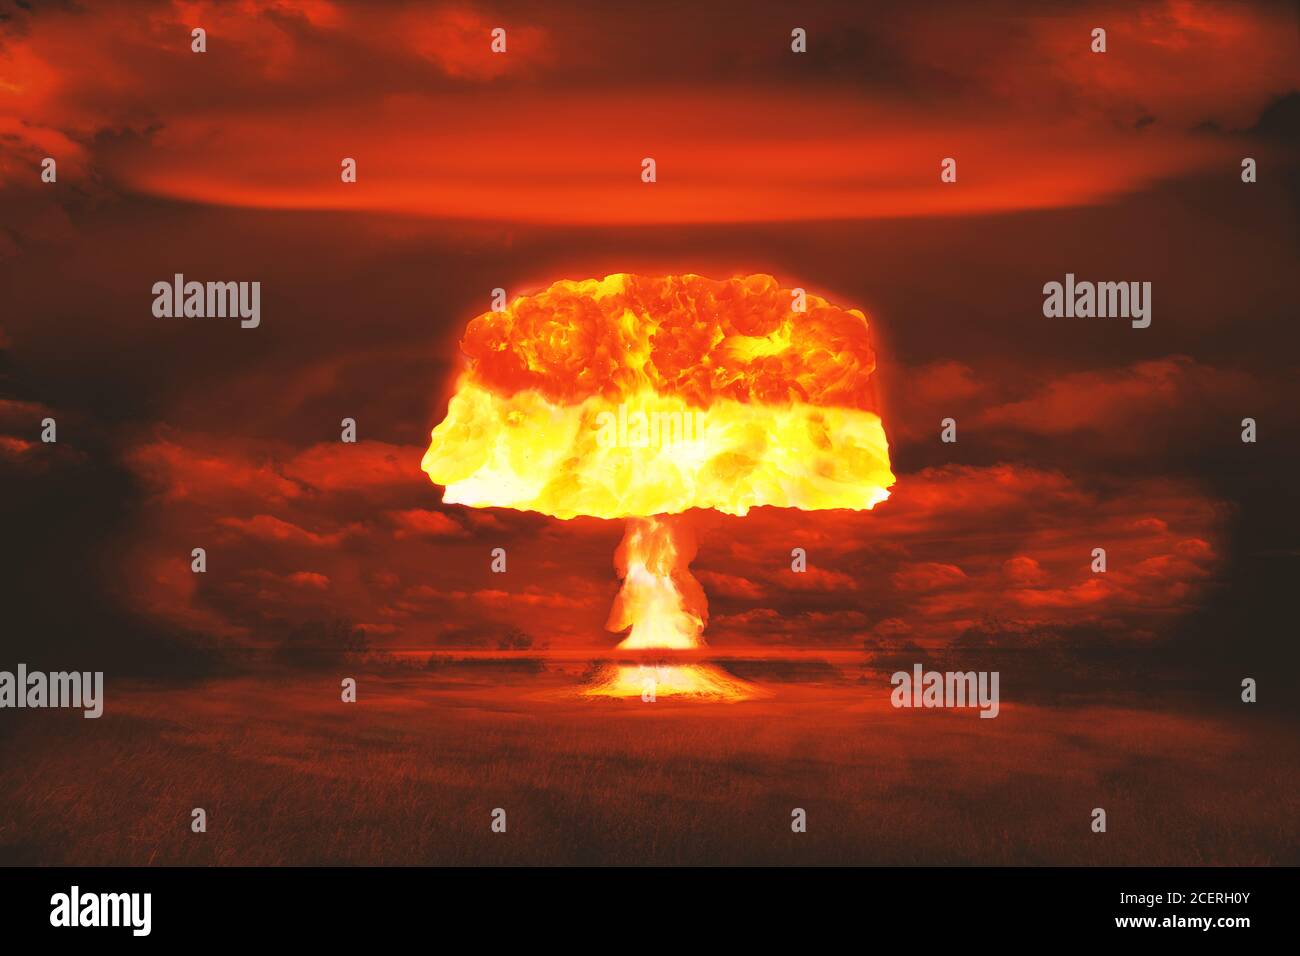 Atomic bomb realistic explosion, red color with smoke, dim image Stock Photo